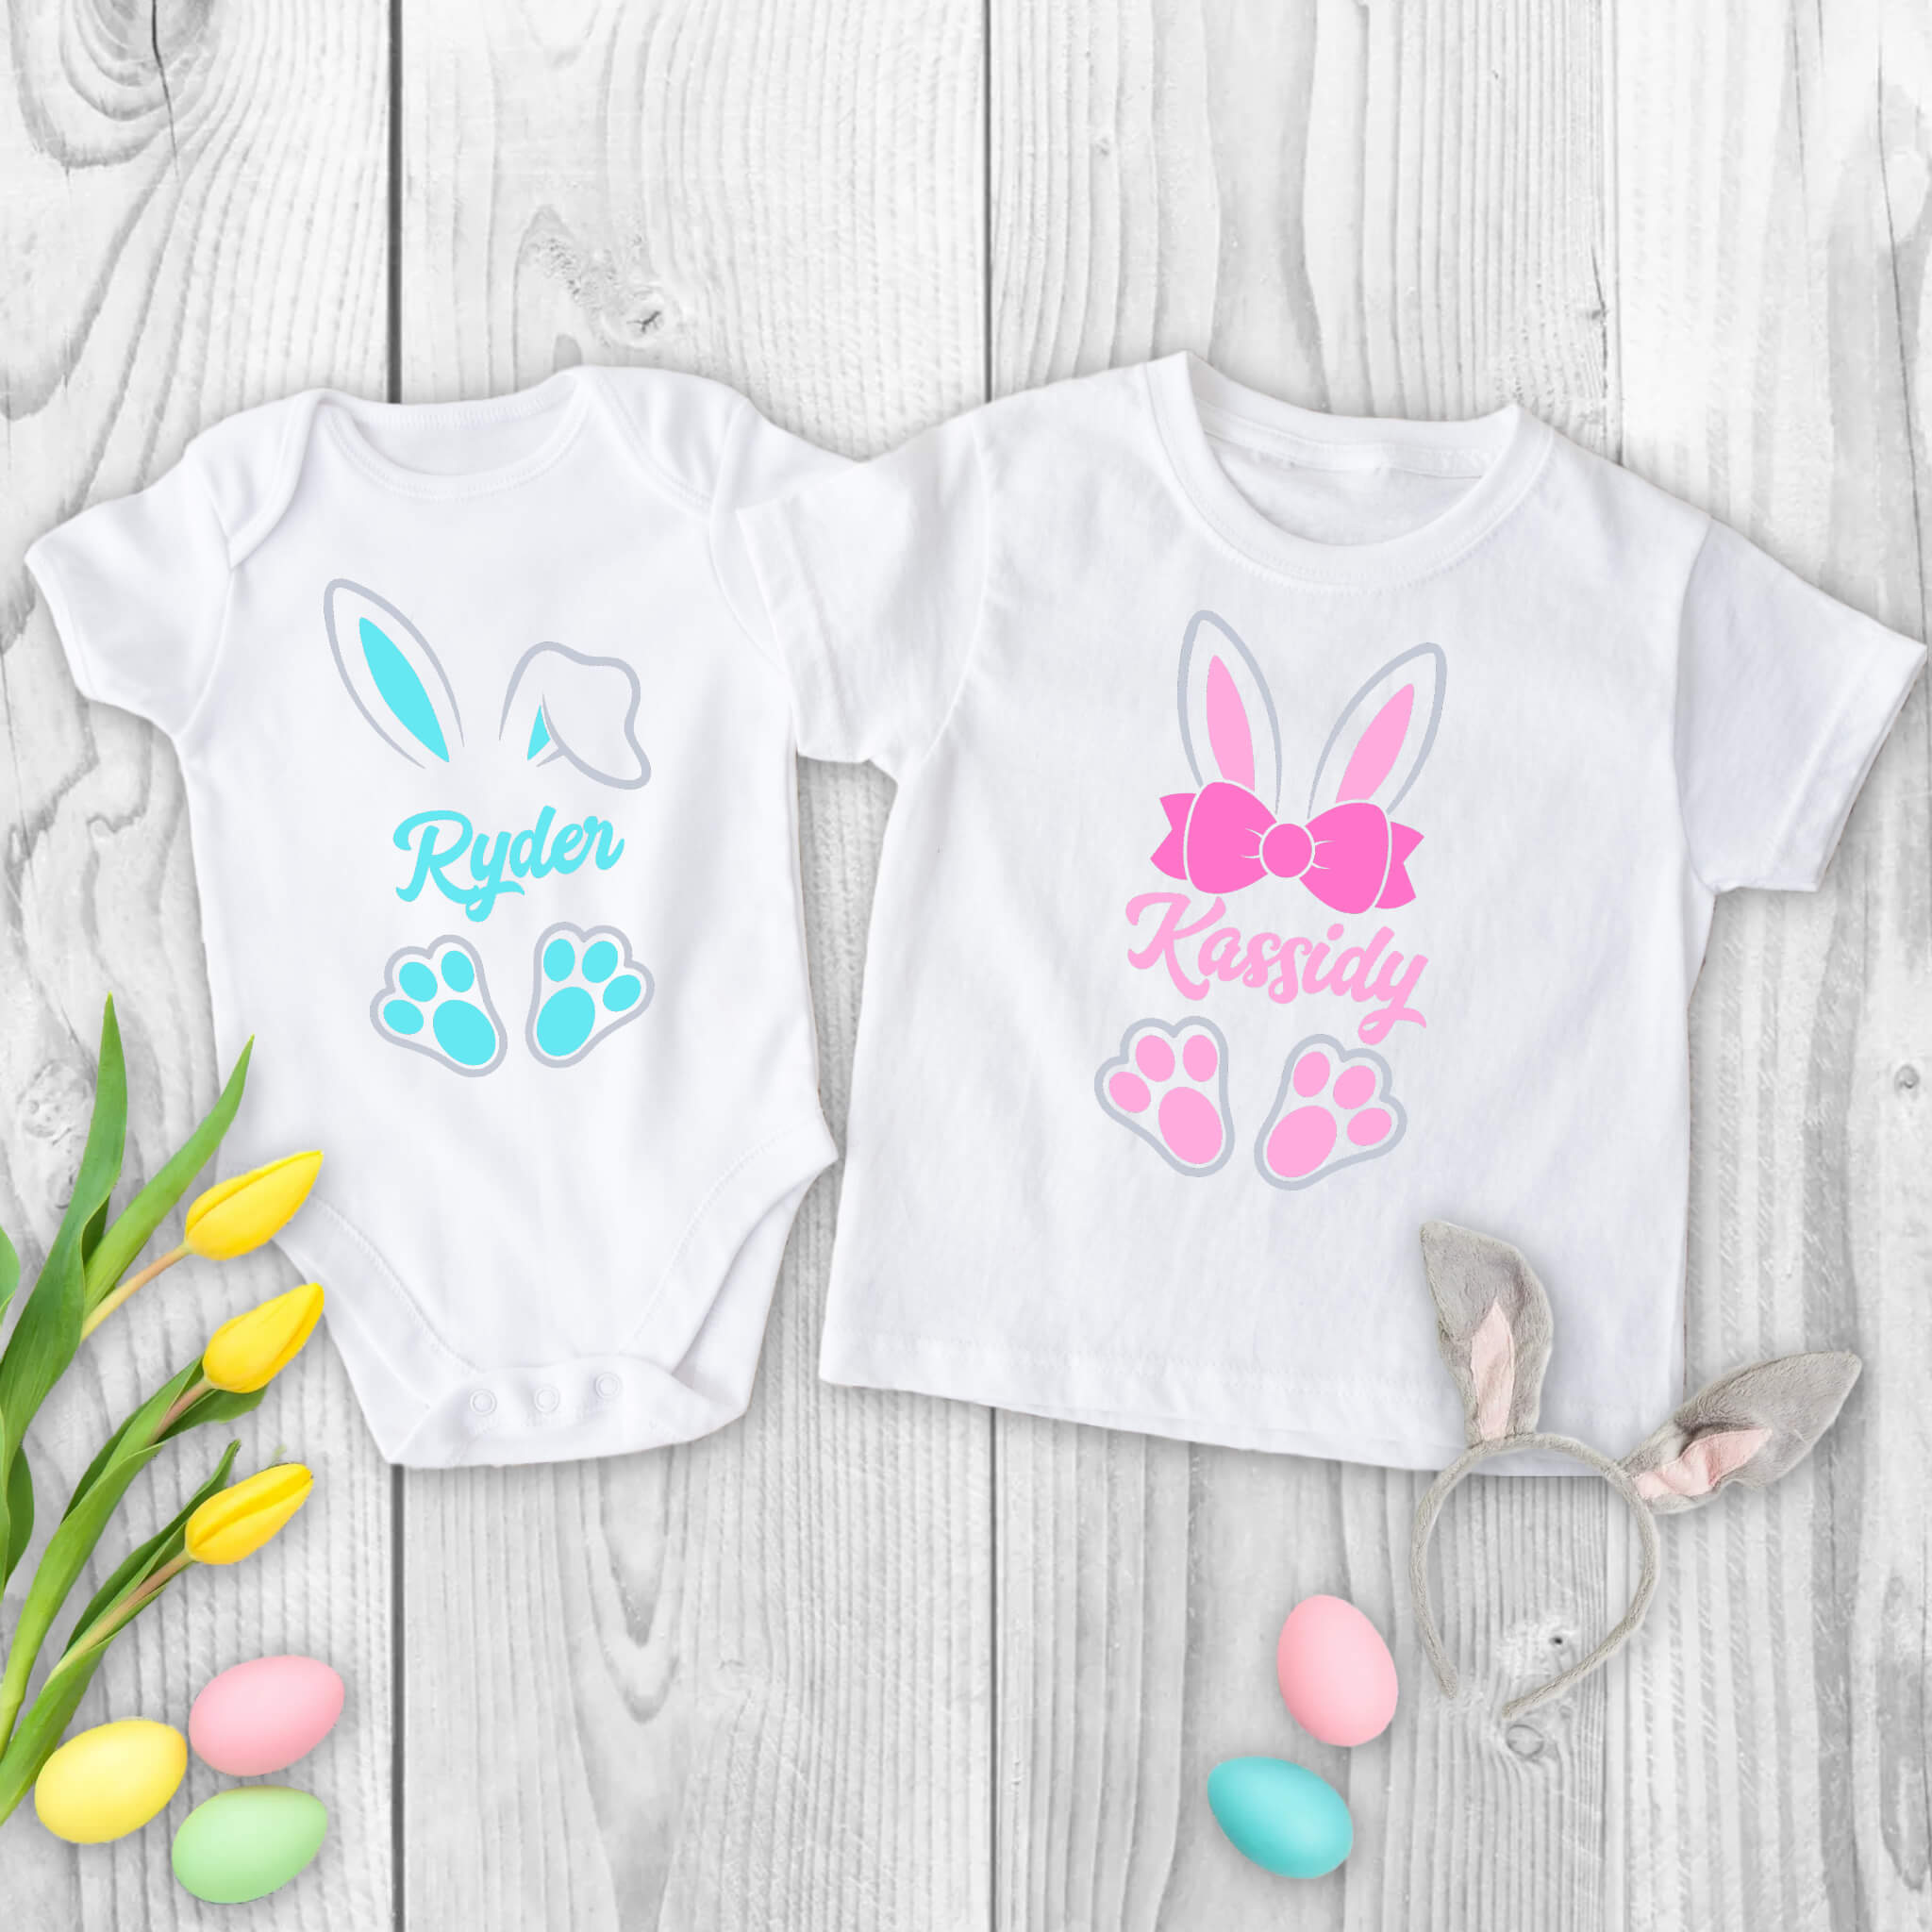 Easter, Customized, Personalized, Bunny Name, Boys, Girls, Twins, Baby, Onesie, Infant T-Shirt